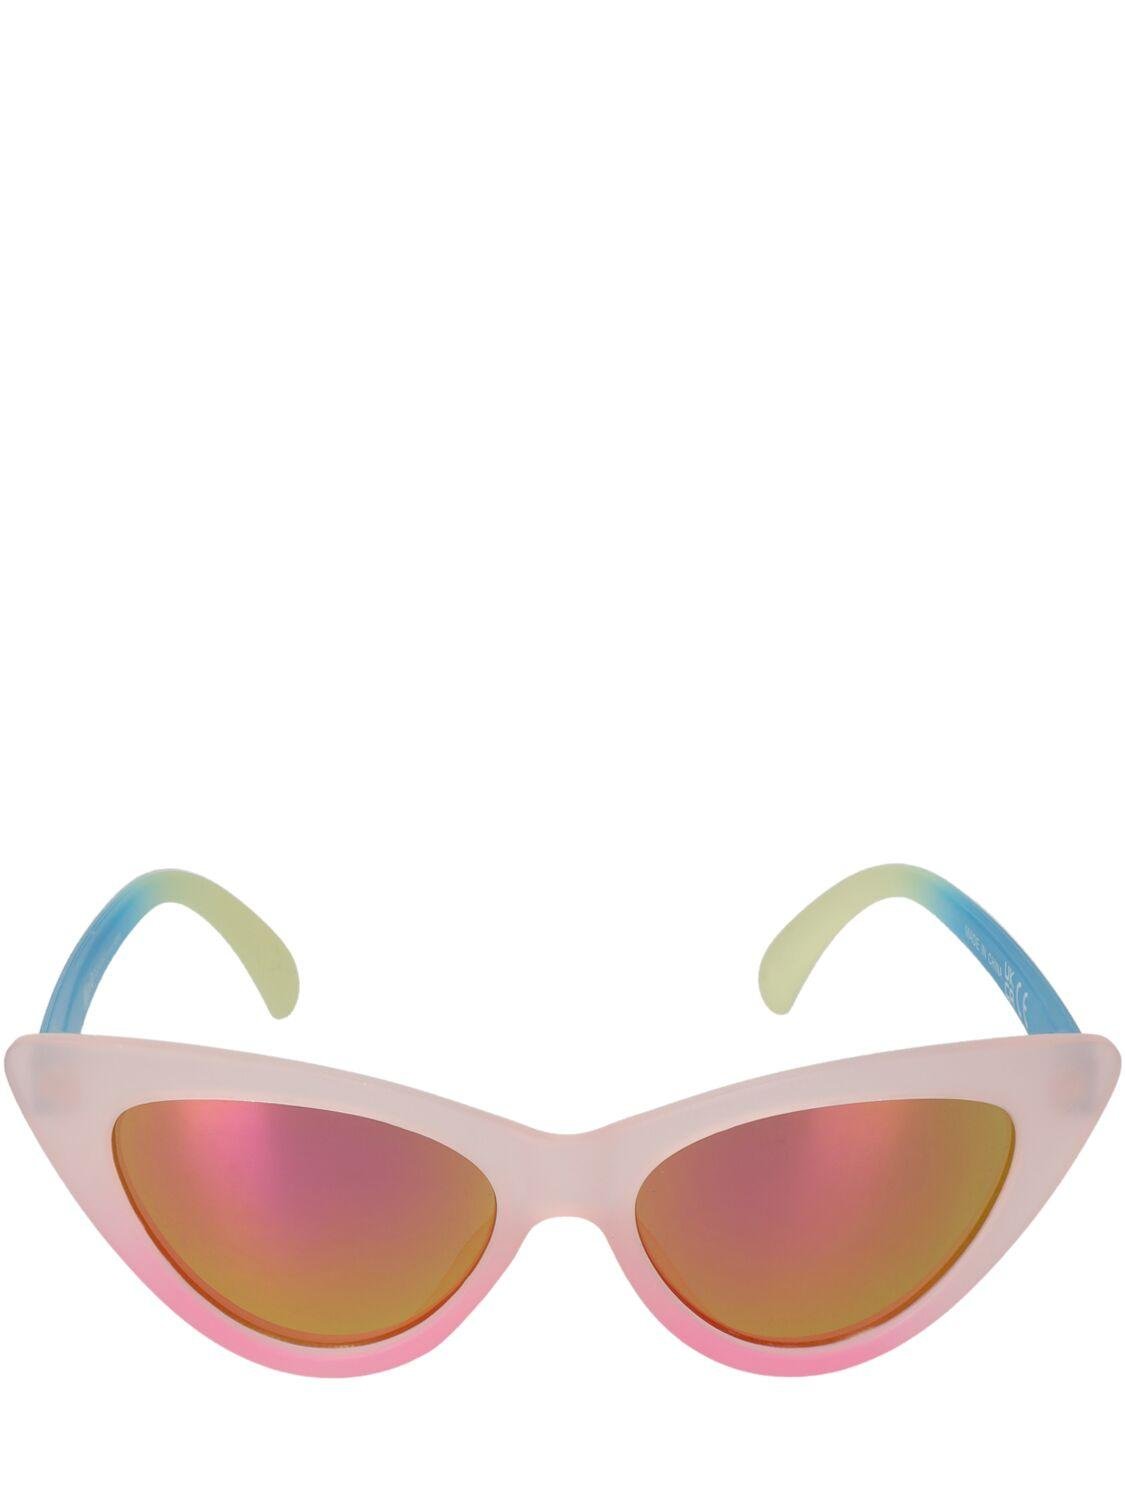 Cat-eye Polycarbonate Sunglasses by MOLO